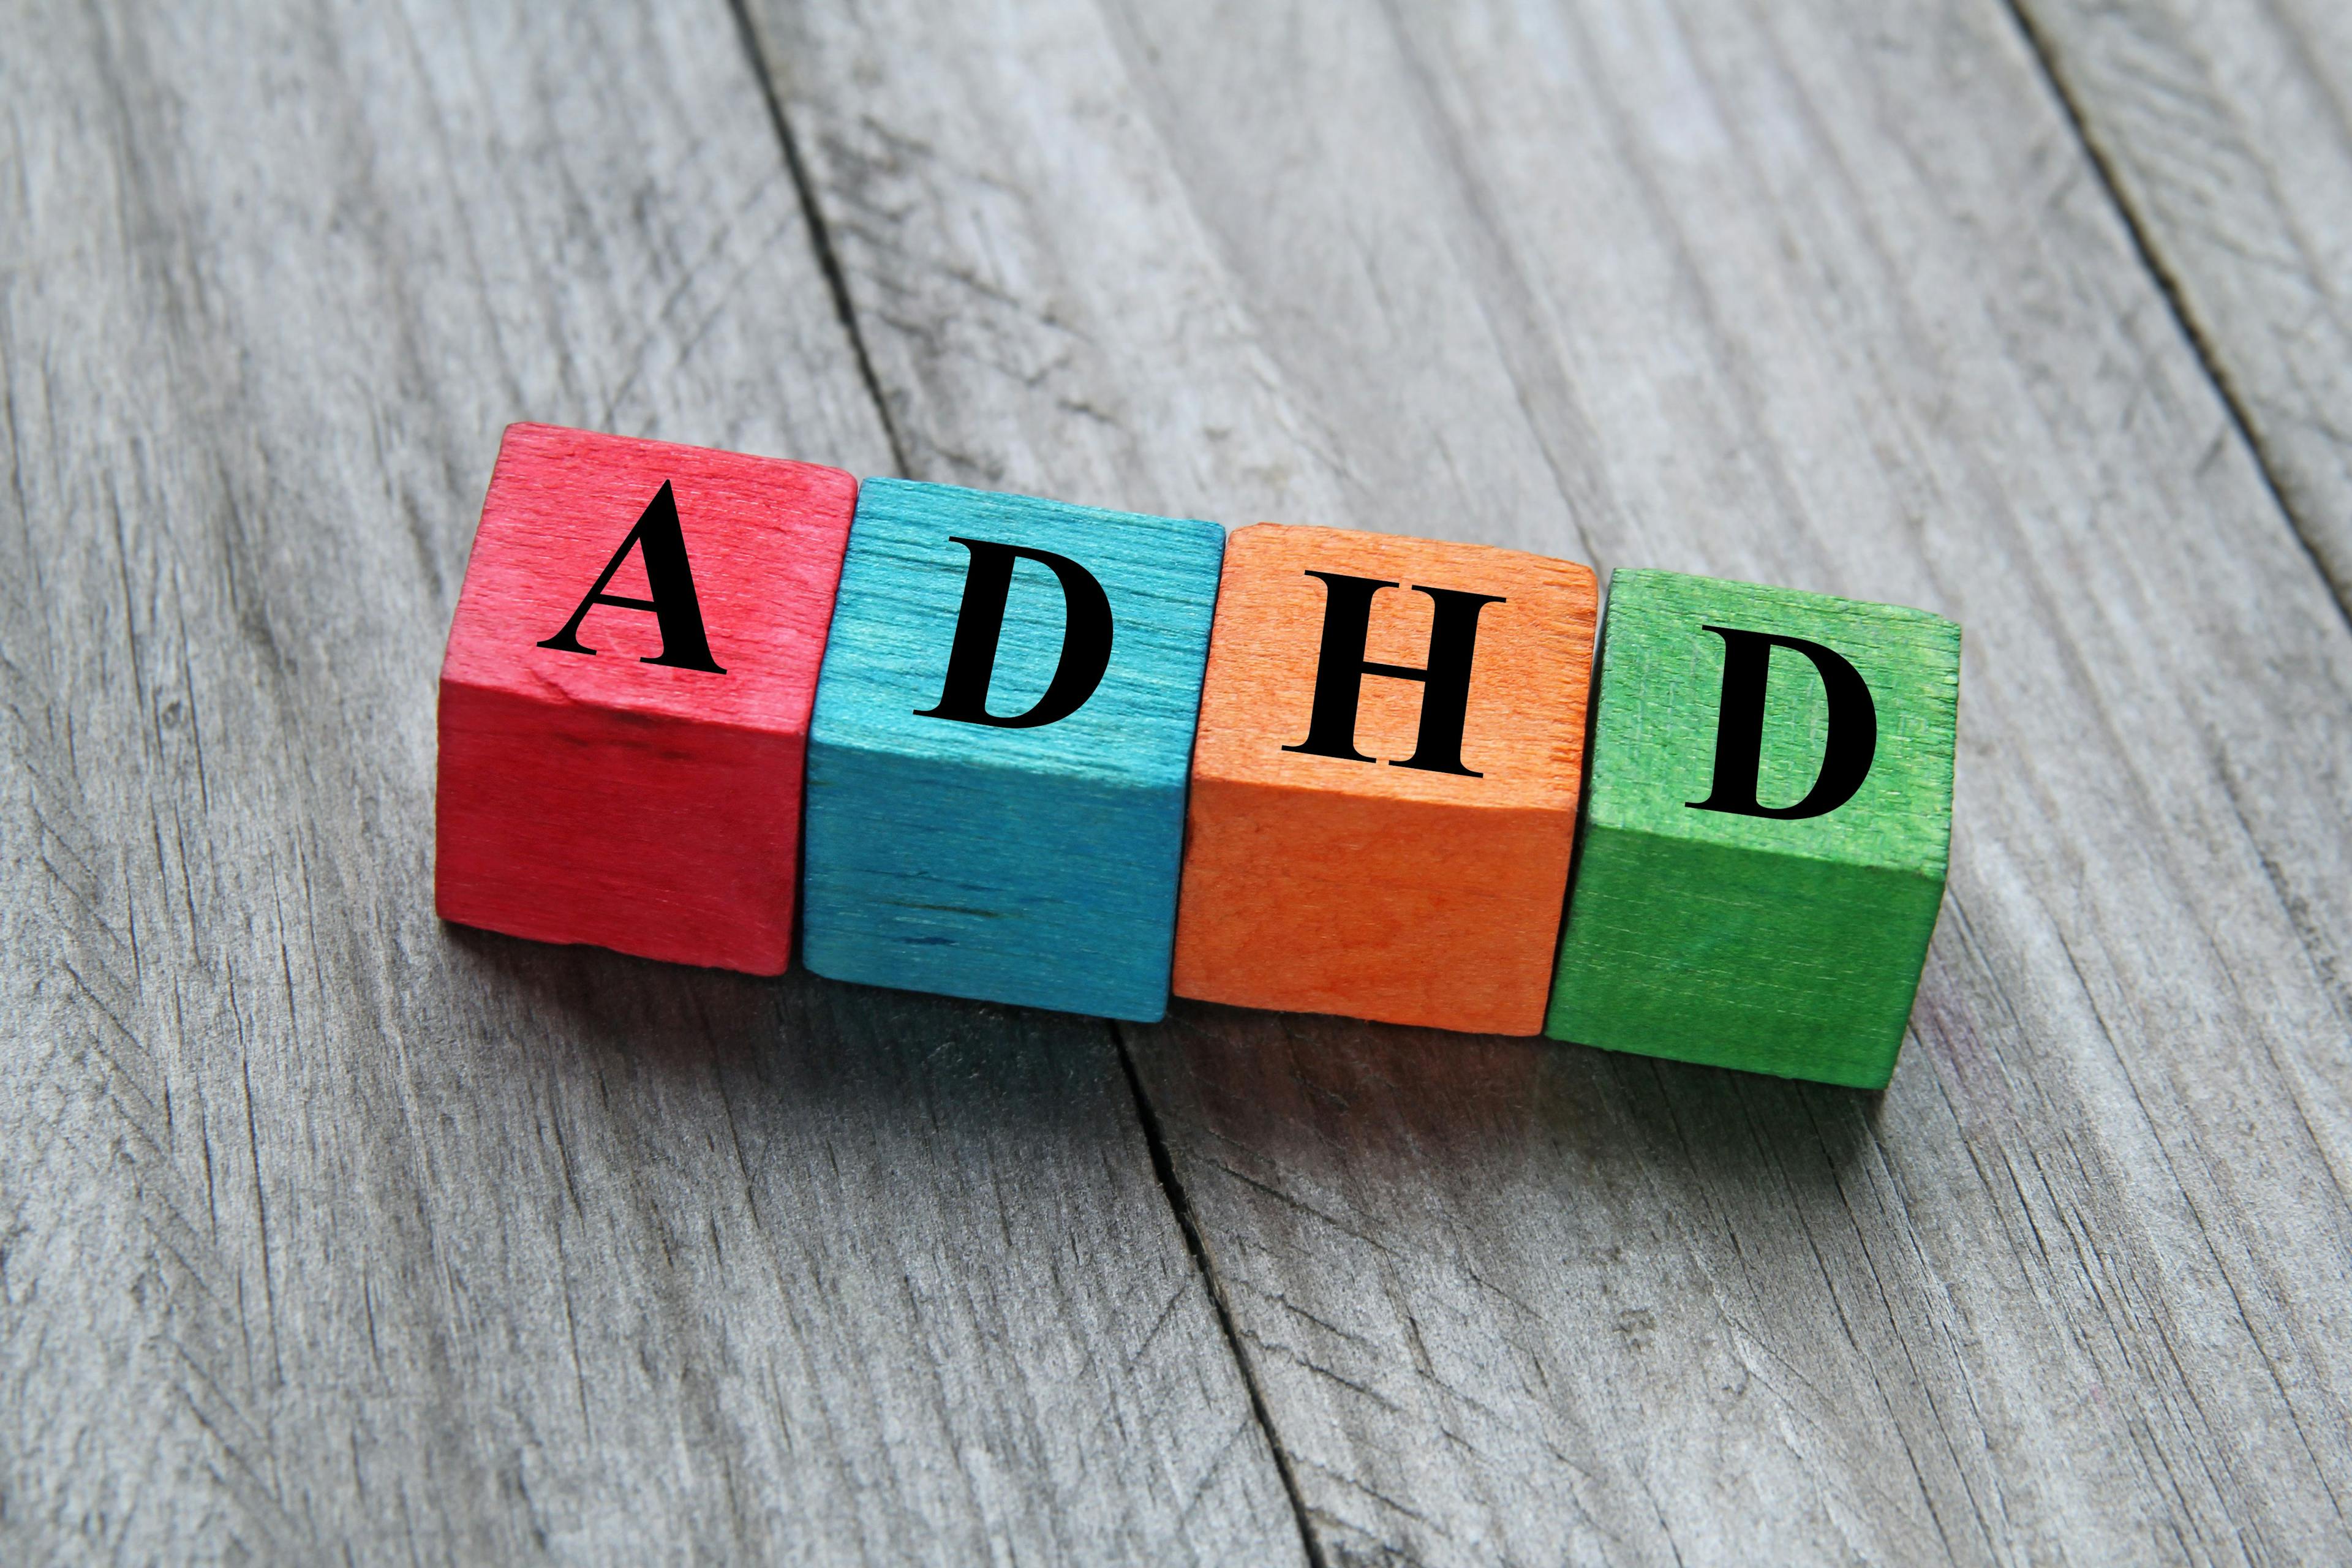 What is the connection between ADHD diagnosis and a Western dietary pattern?